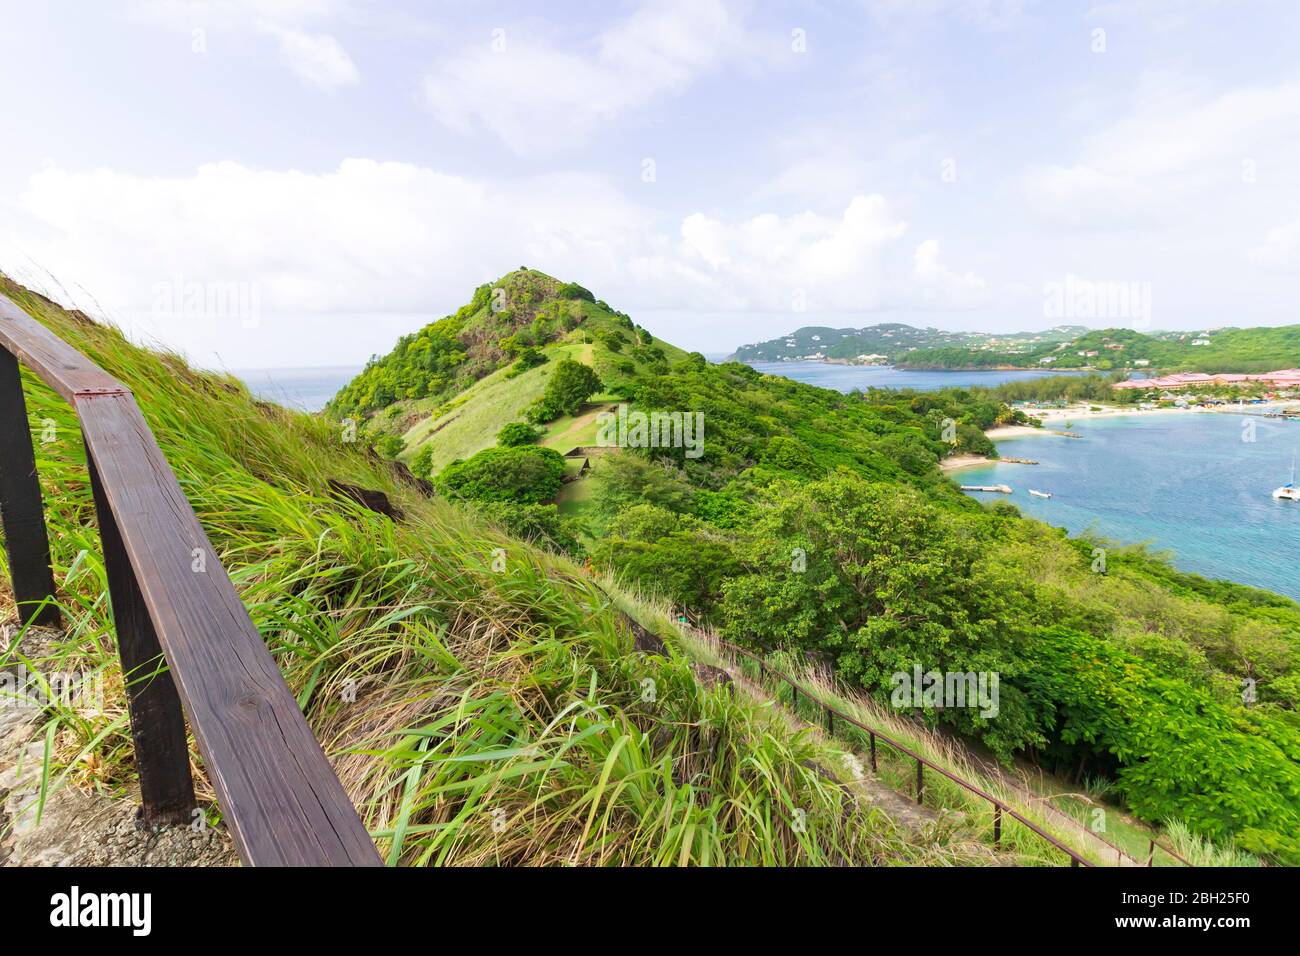 Scenic panoramic tropical landscape from a concrete path guarded by a wooden railing Stock Photo